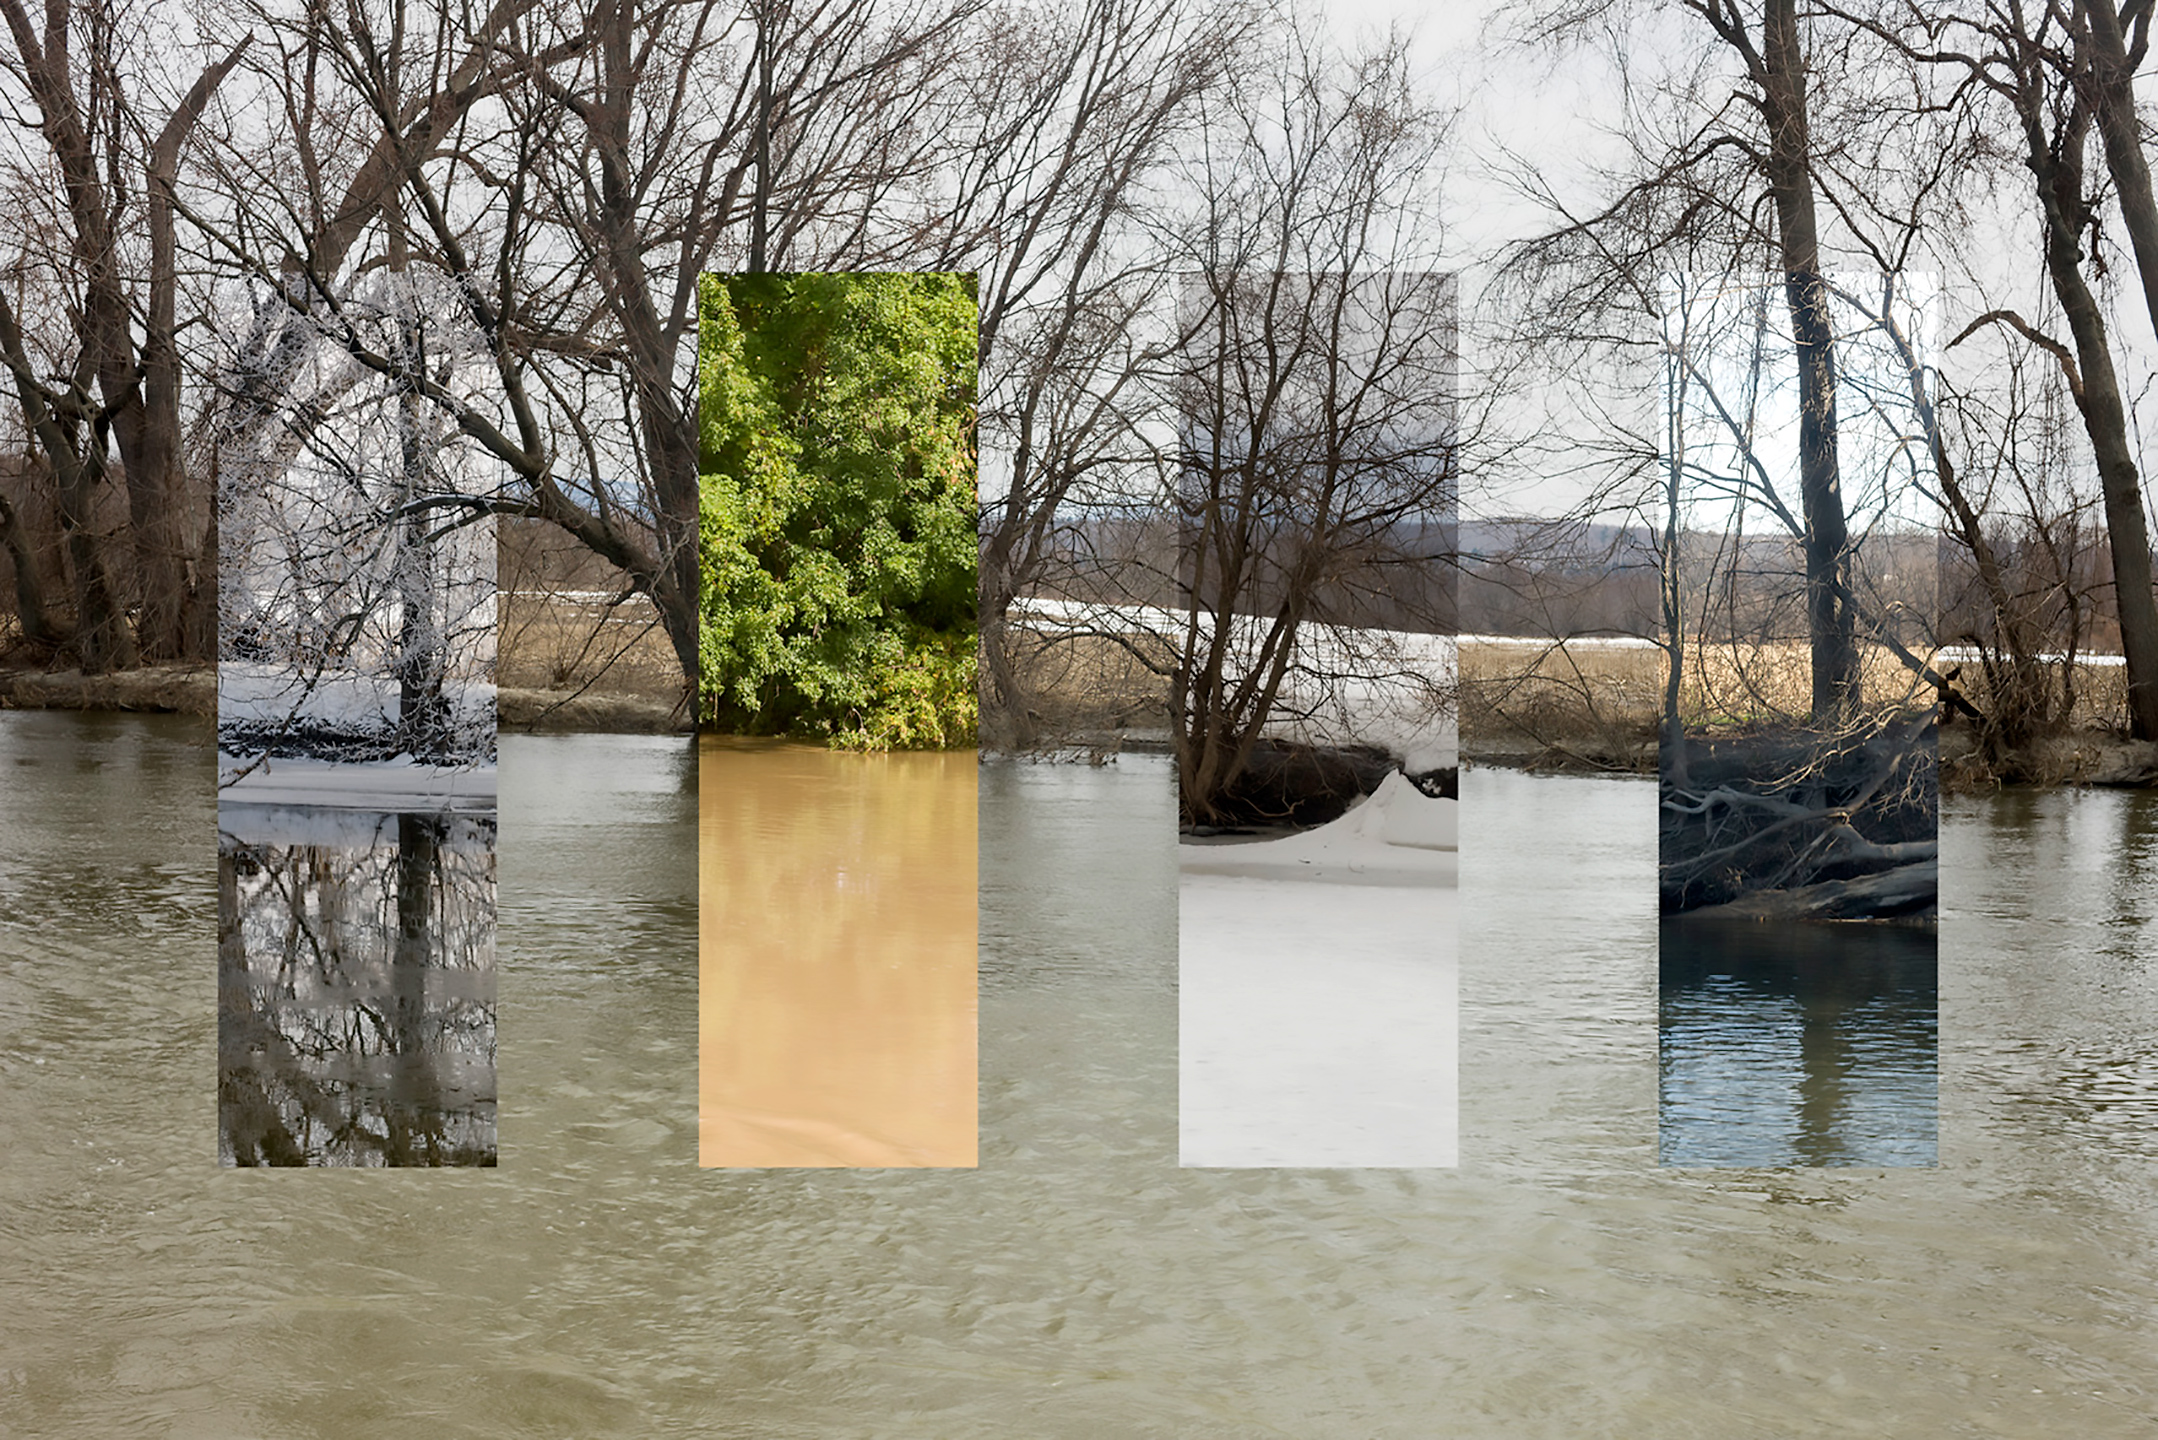 "Time composite" looking over Otter Creek.